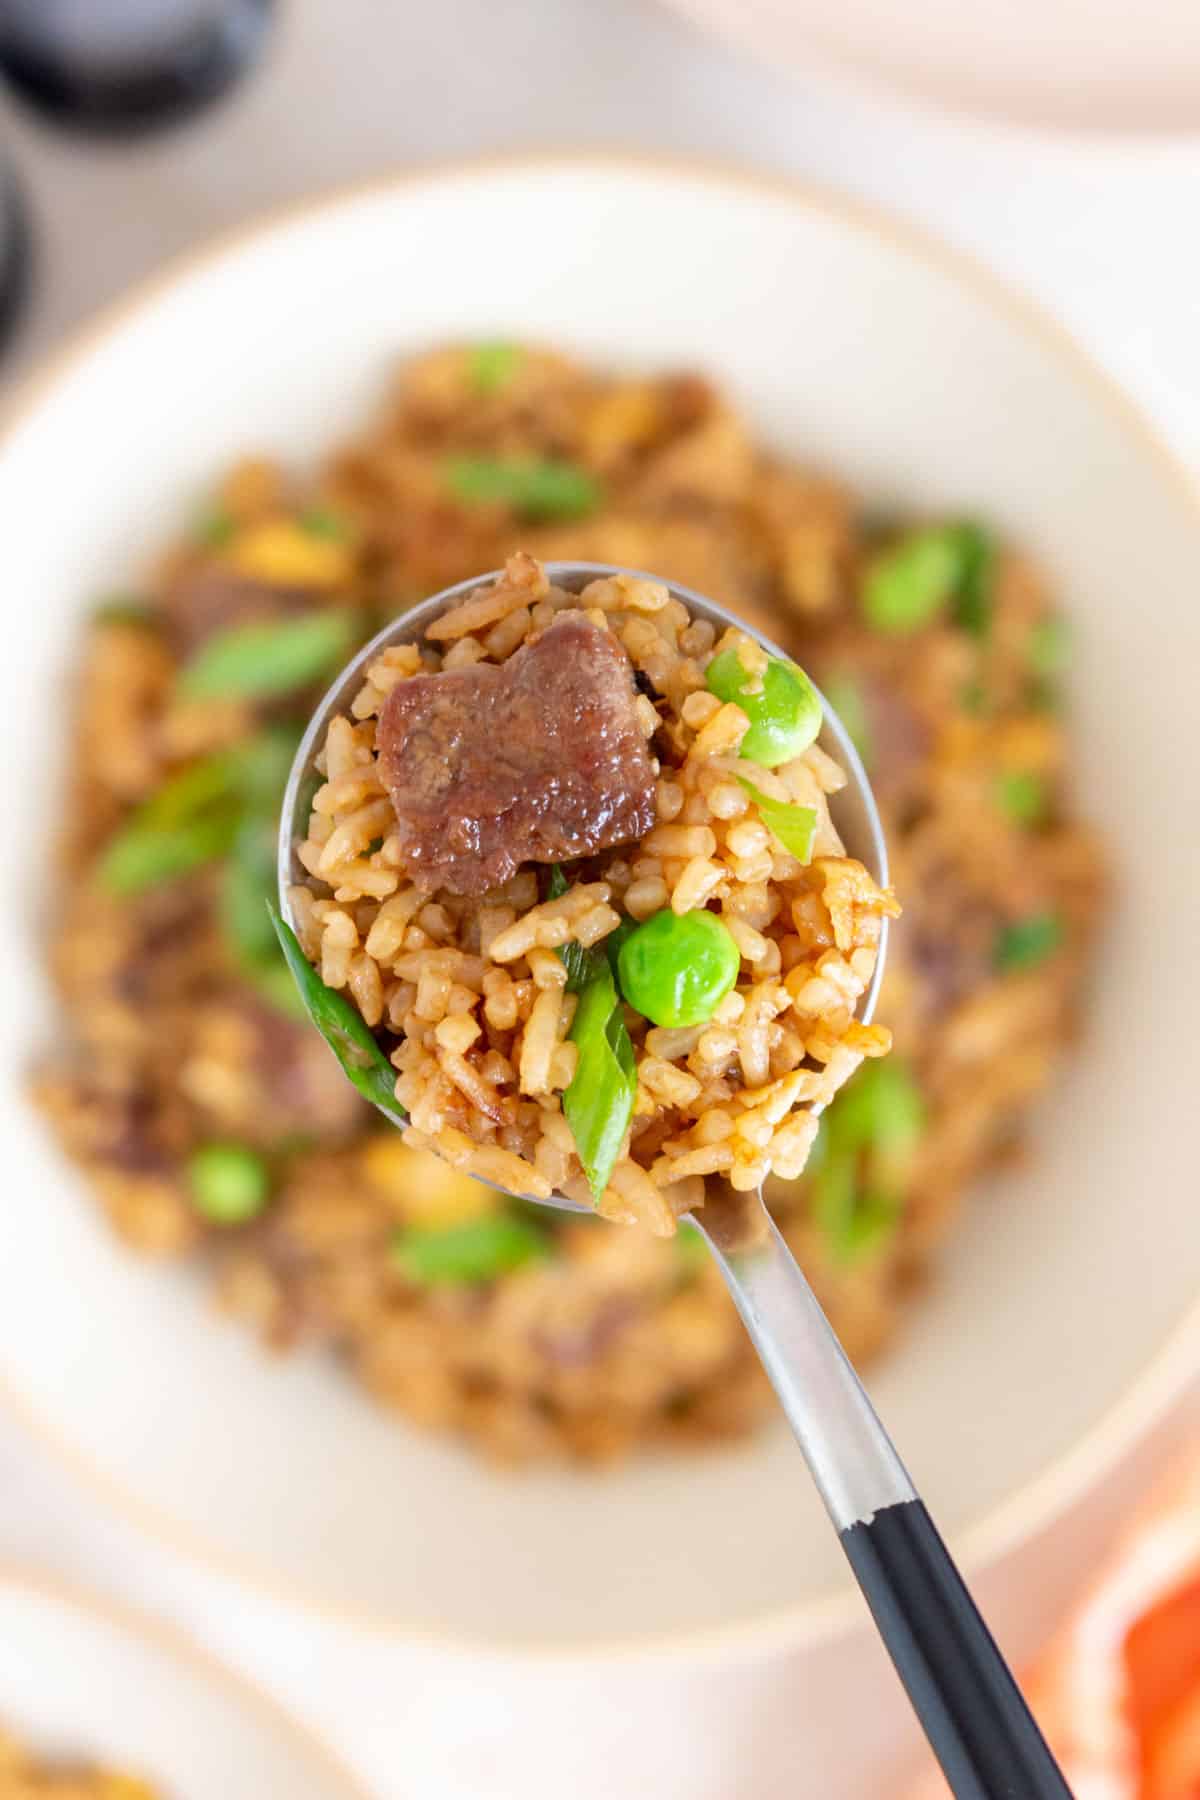 A spoonful of steak fried rice lifted from the plate.